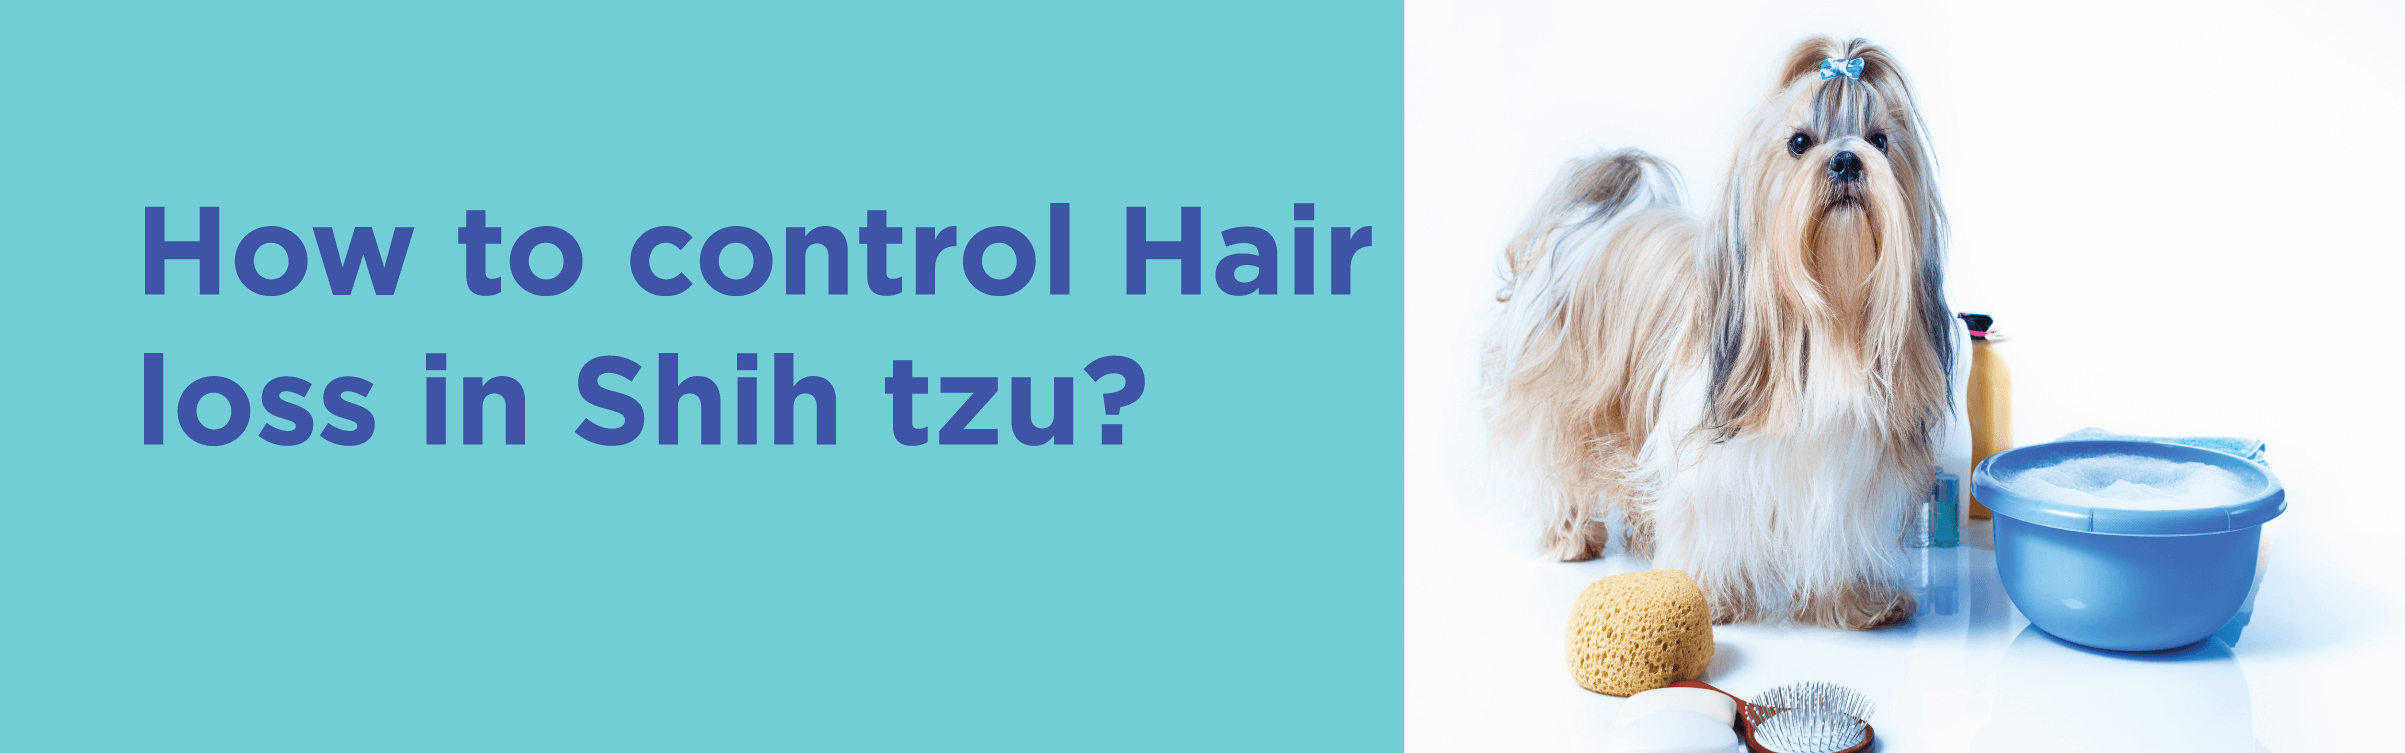 How to control Hair loss in shih tzu